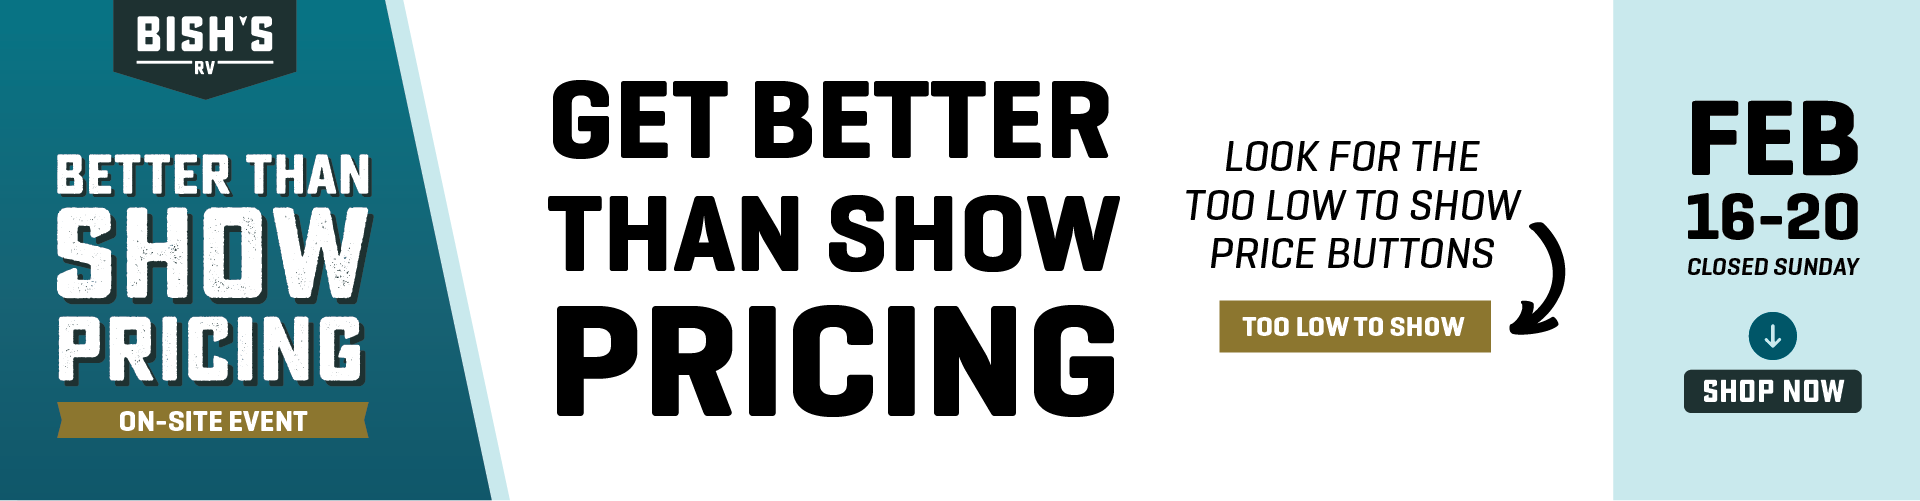 Get Better Than Show Pricing on All RVs - Salt Lake City & American Fork